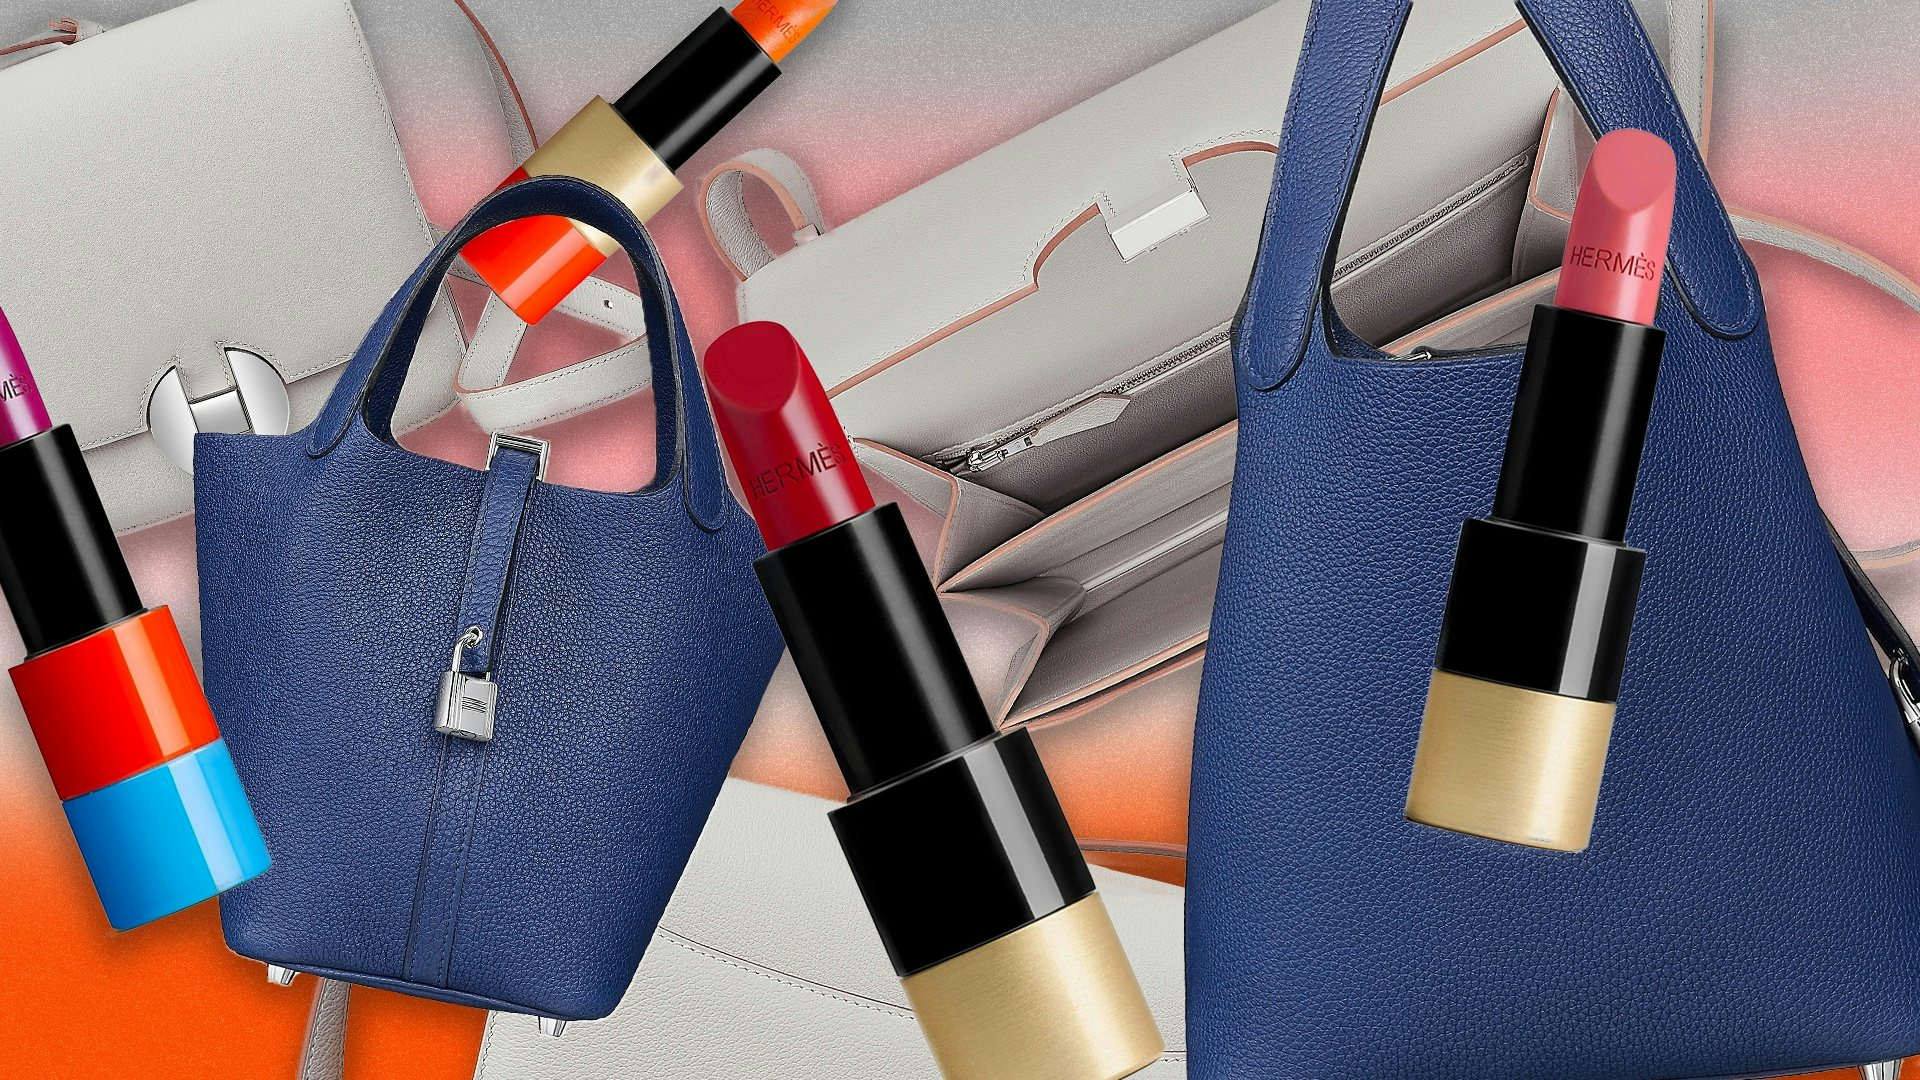 Agility Research & Strategy just released its second consumer study, which gauges the impact of COVID-19 on eight key luxury markets in China. Photo: Hermès